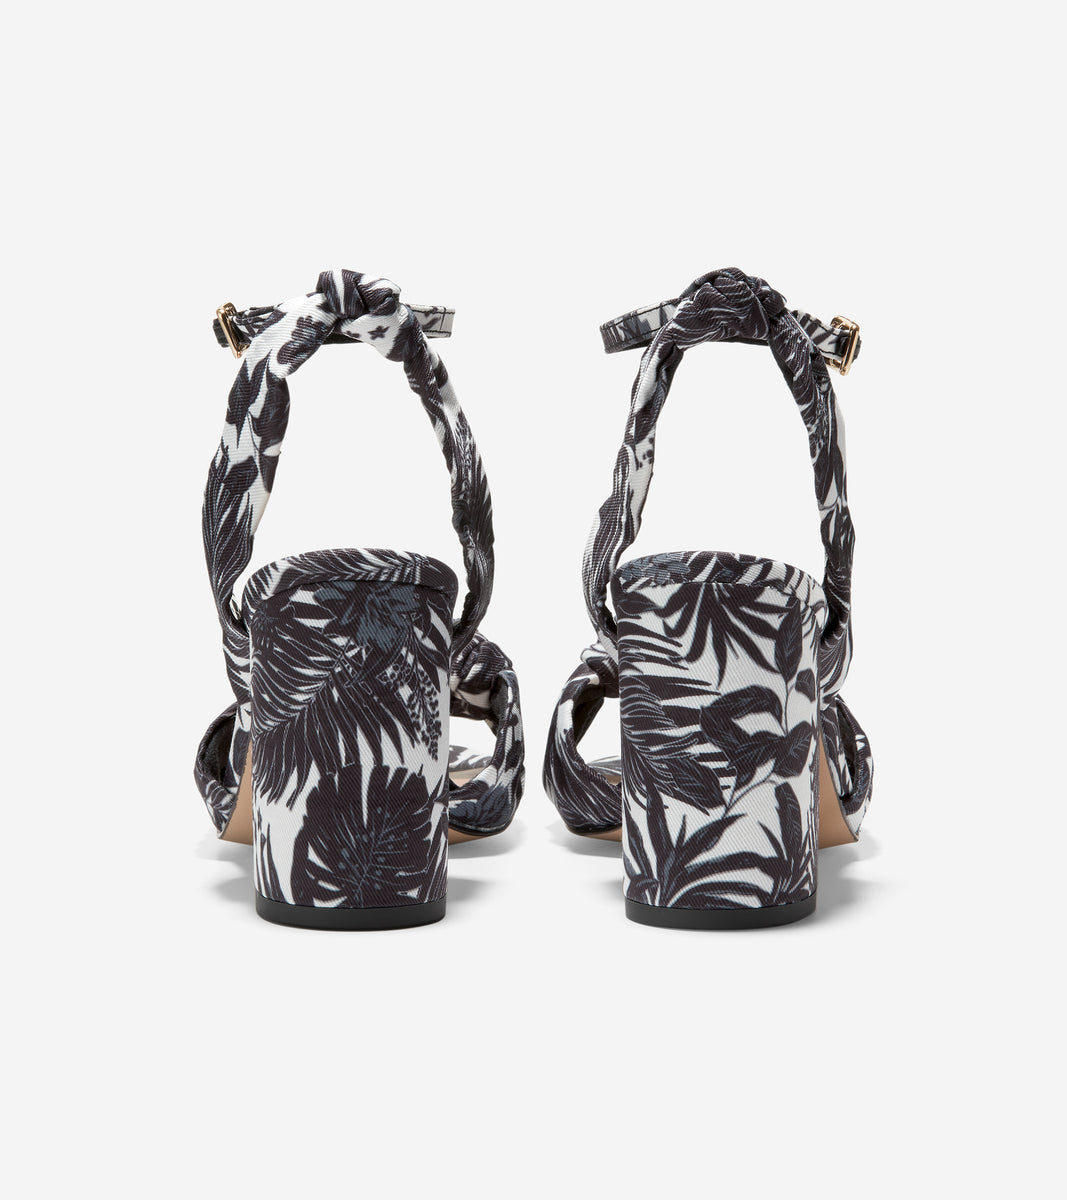 w26292-Women's Kaycee Knotted Sandal-Black-Ivory Beverly Floral Print